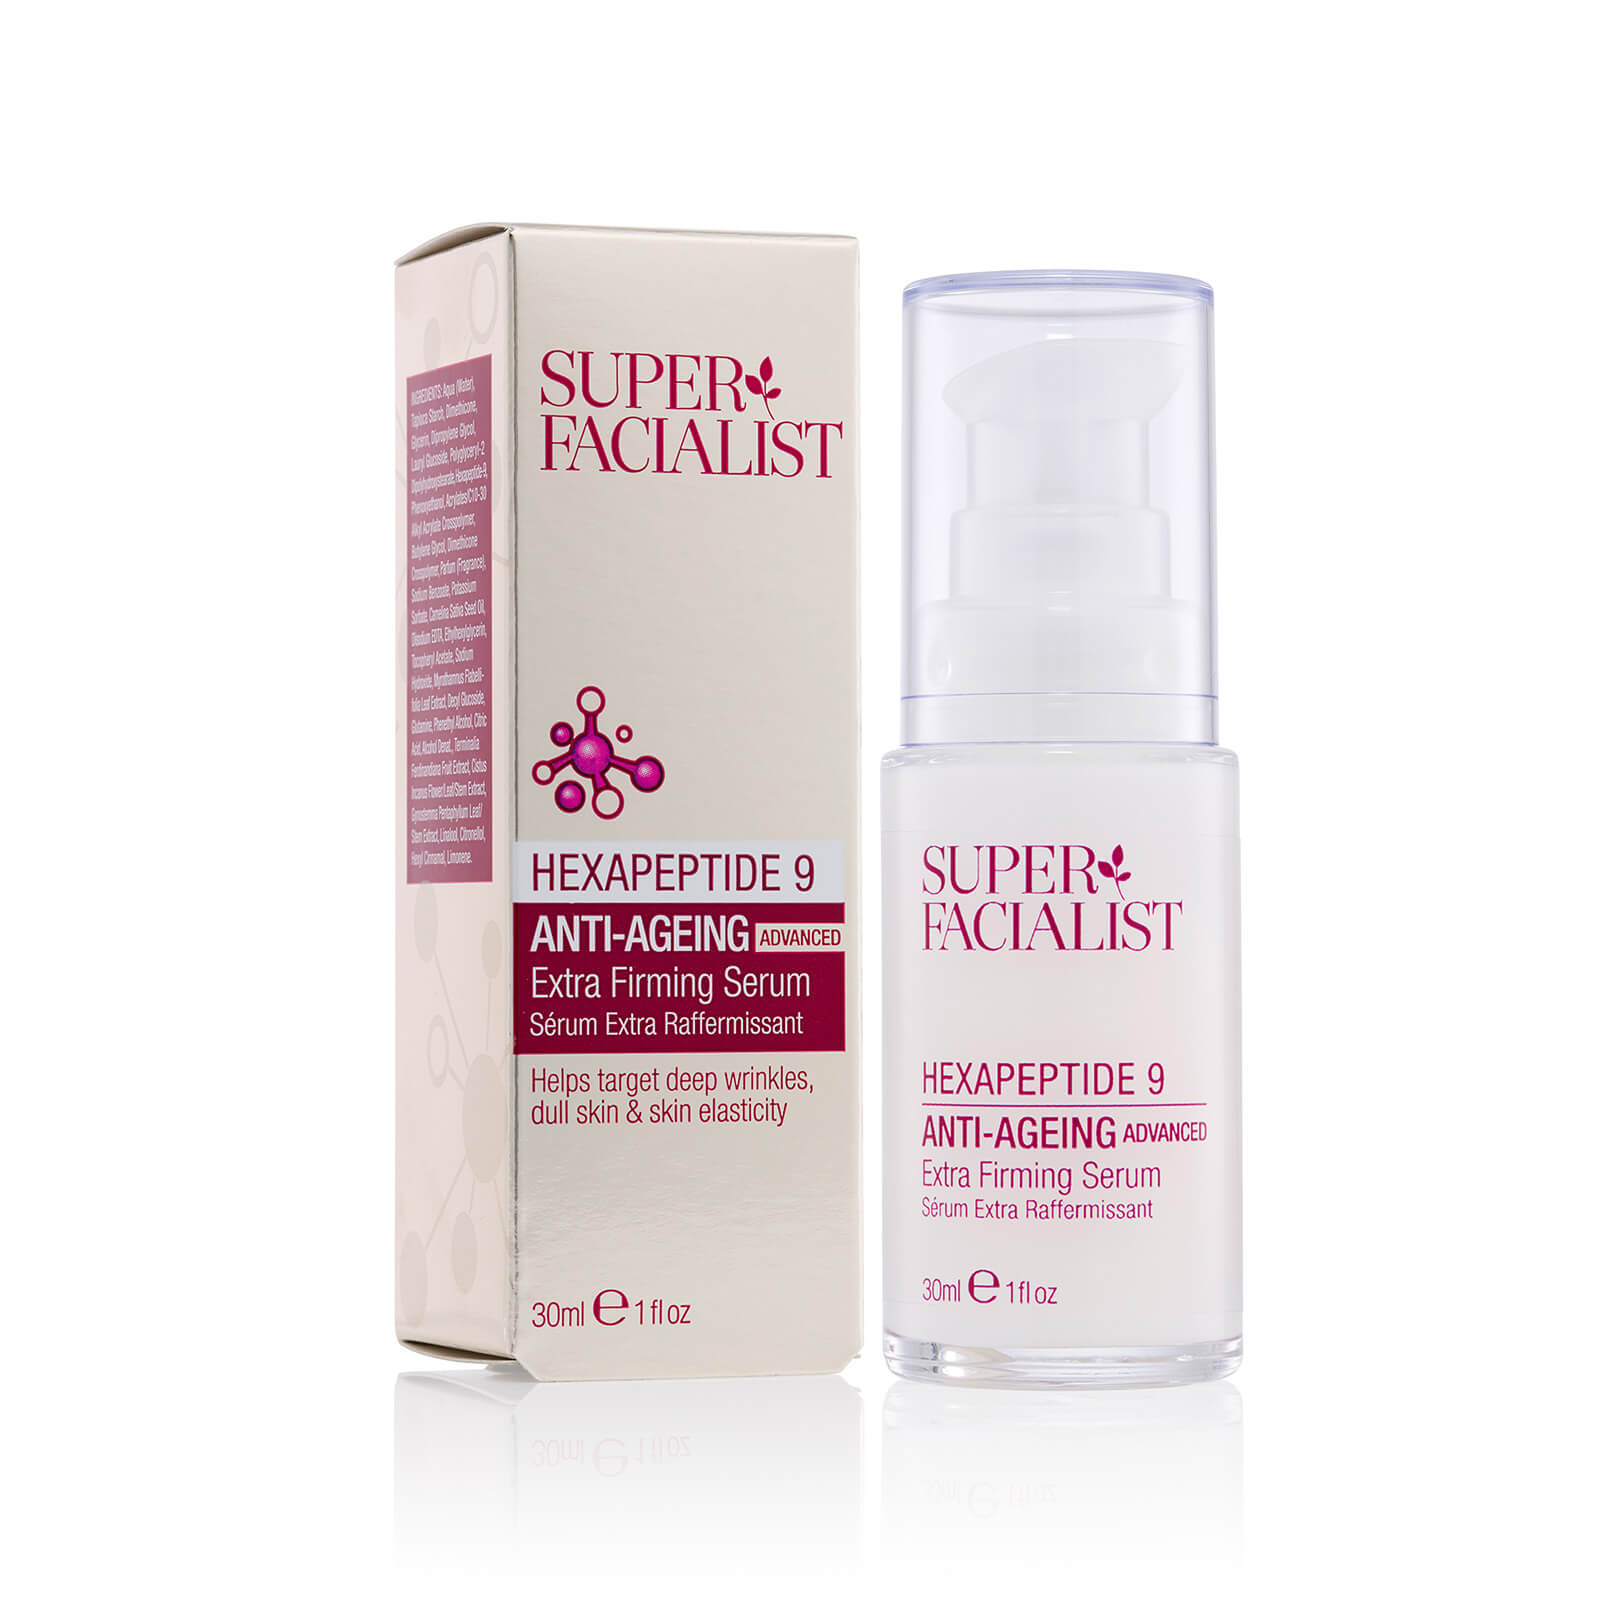 Image of Super Facialist Hexapeptide-9 Anti-Ageing Advanced Extra Firming Serum - 30ml